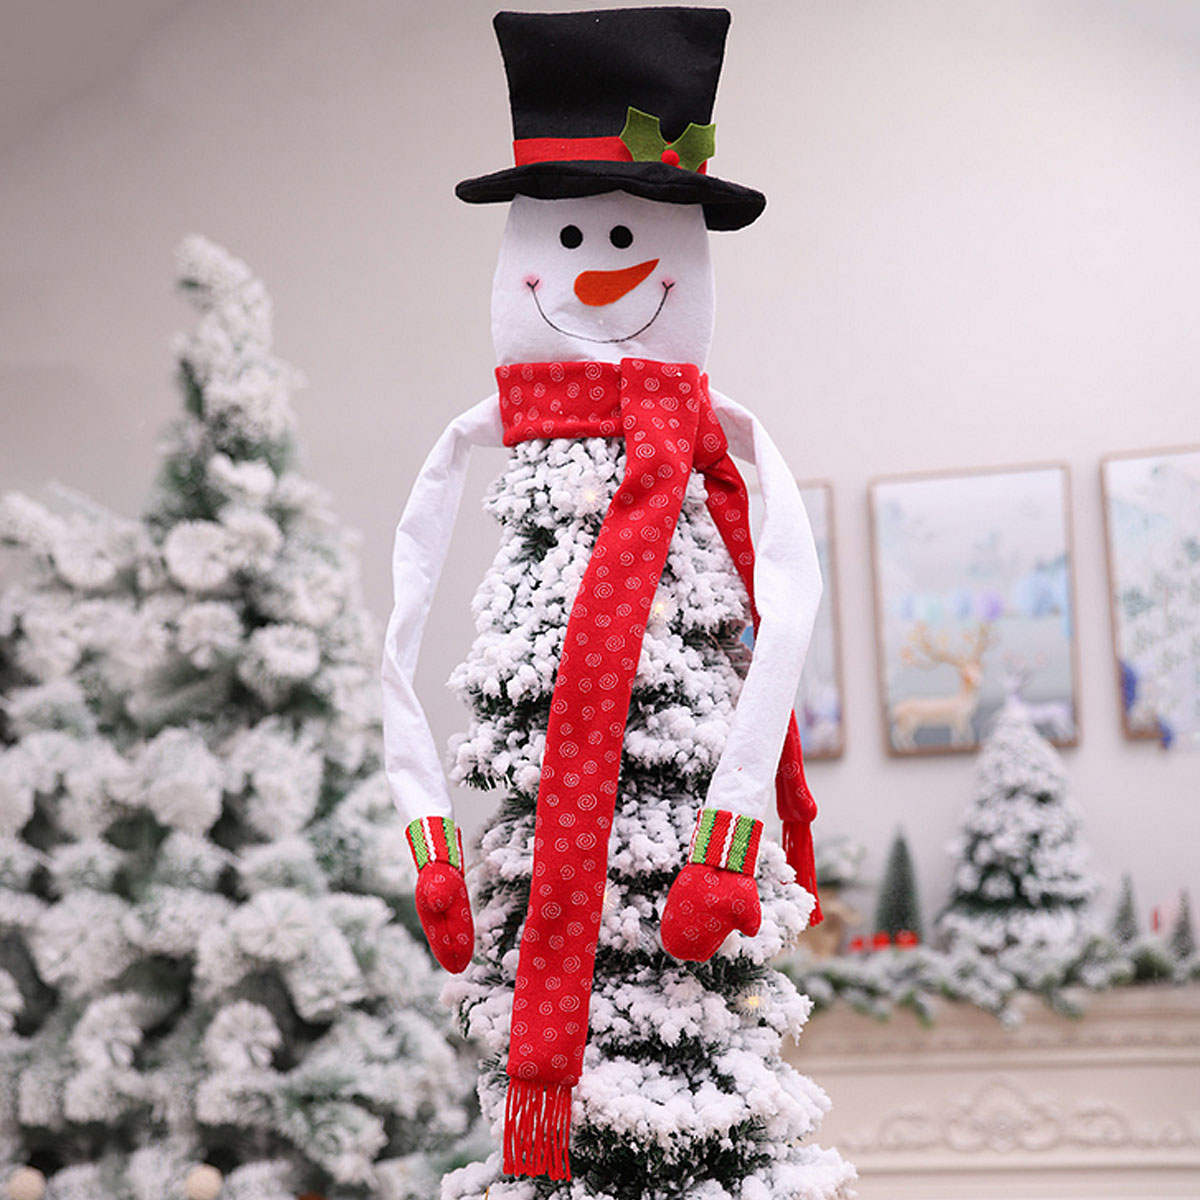 

120x94cm Christmas Tree Snowman Hang On Ornaments Free Style Party Decorations